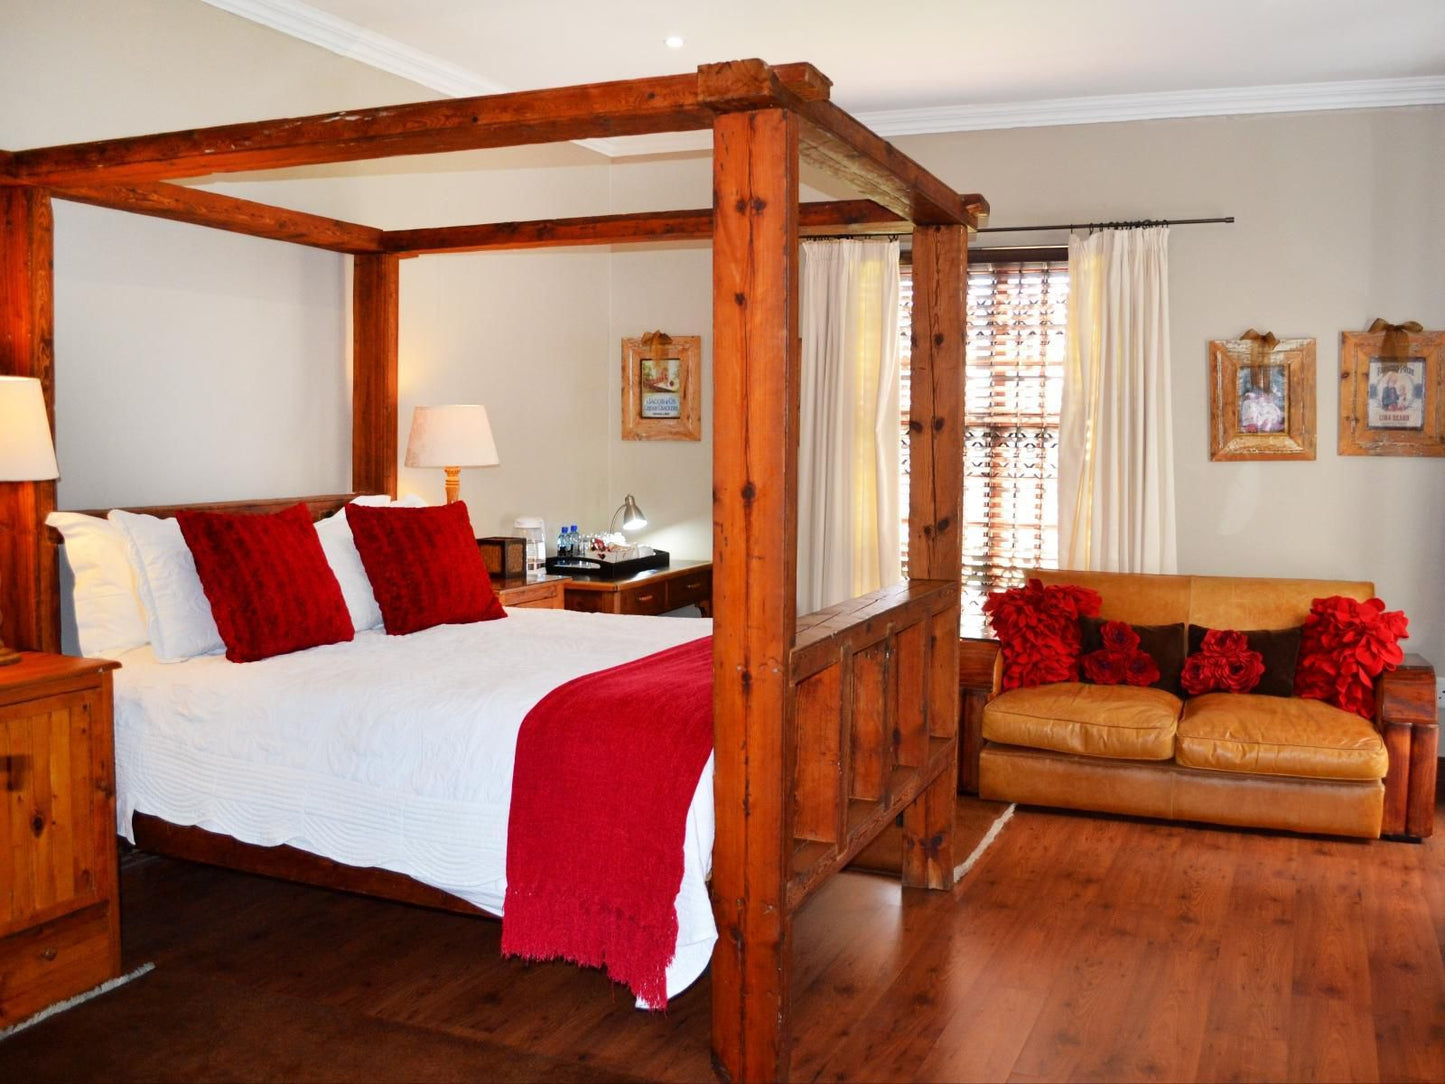 96 On Bree Guesthouse Heilbron Free State South Africa Bedroom